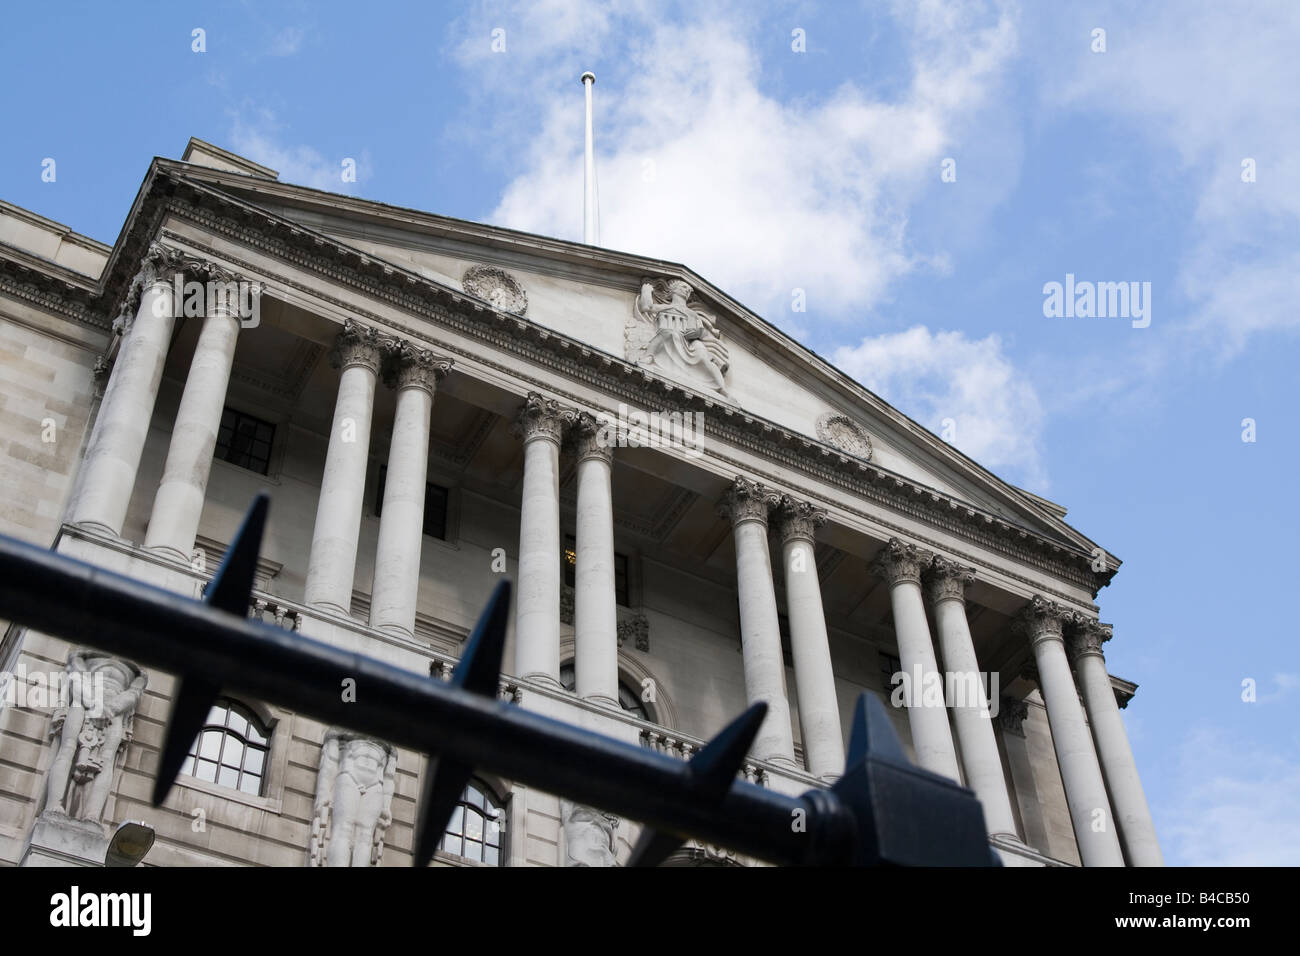 The Bank of England building in the City of London, England Stock Photo